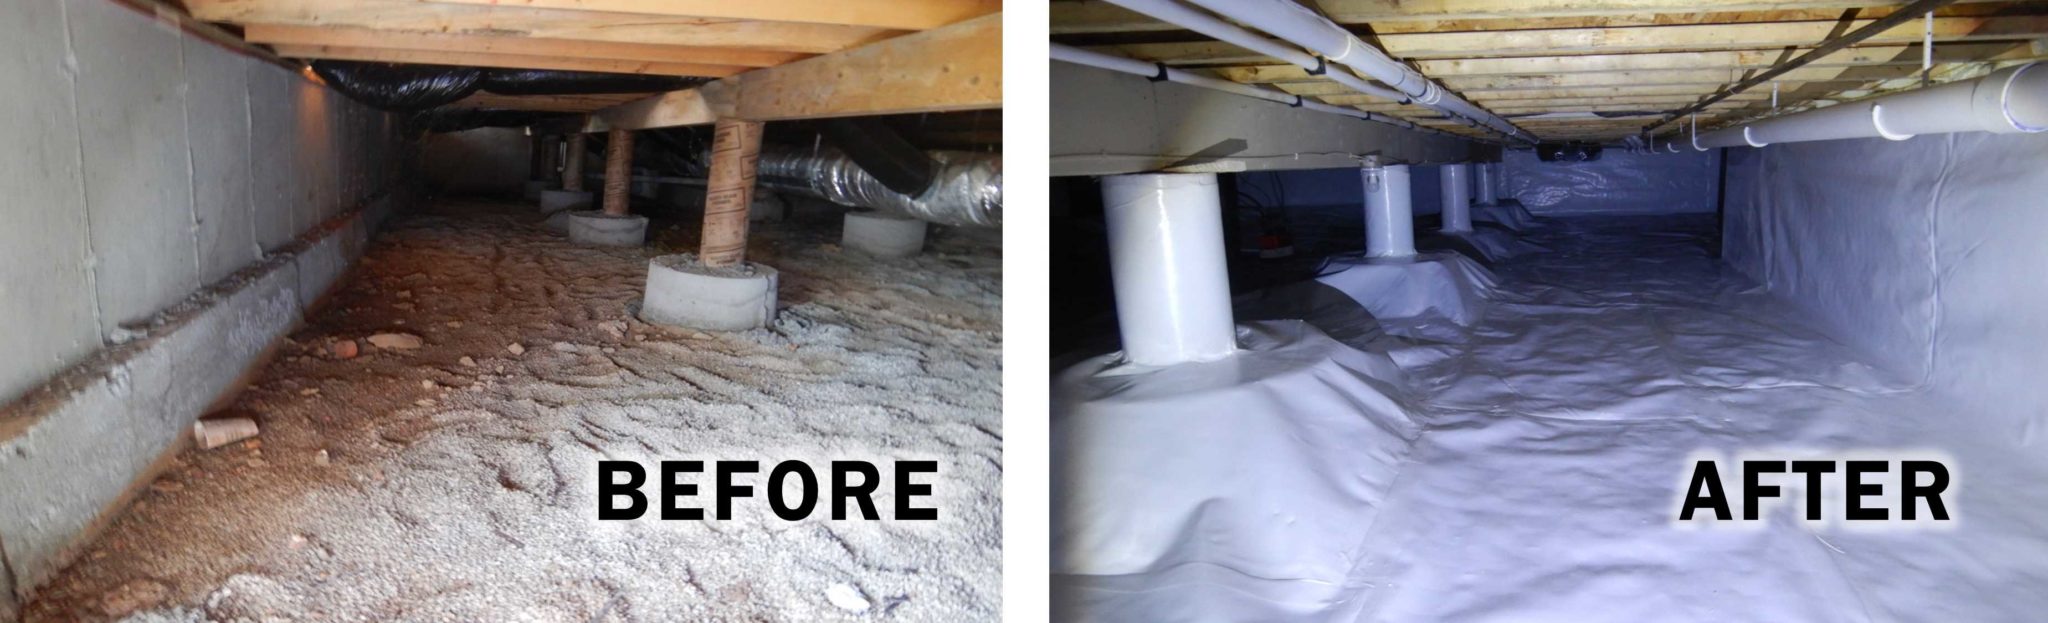 Crawl Space Encapsulation Before and After.